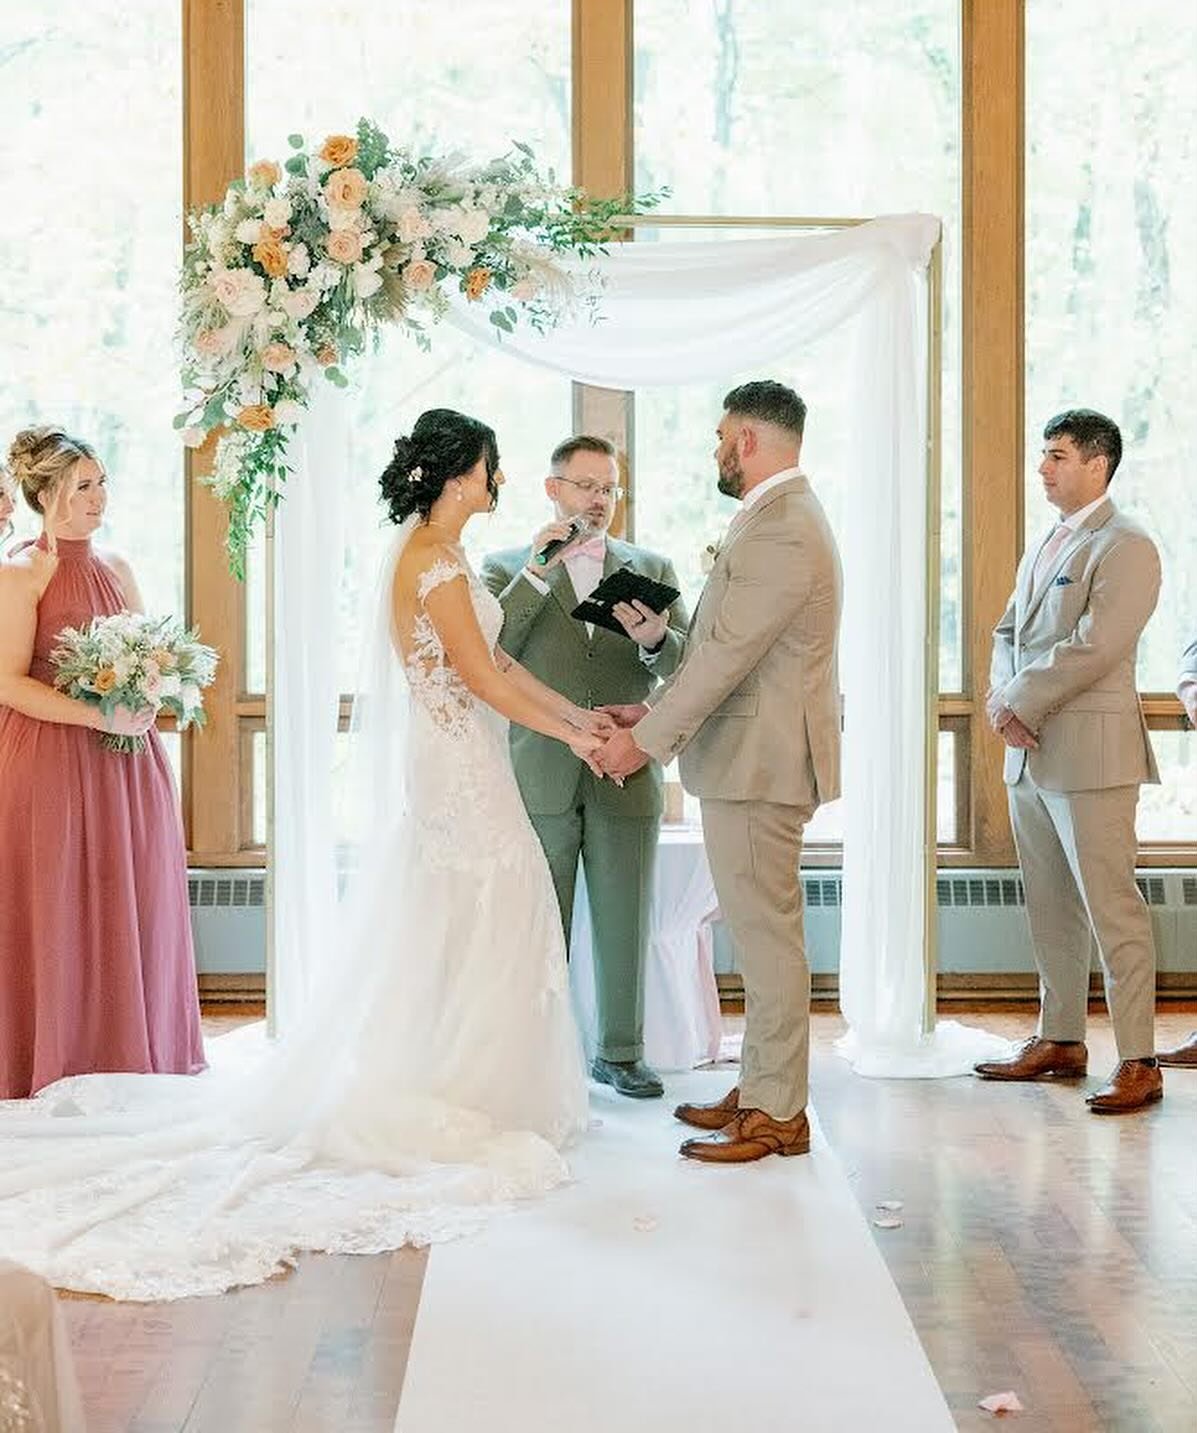 Light as a feather, this weather and these look back photos from Kelsey &amp; Jason&rsquo;s #wedding make us feel like we&rsquo;re floating on a cloud of happiness!

Venues: @metroparkstoledo &amp; @cityvieweventcentertoledo 
Coordination: @forevermo